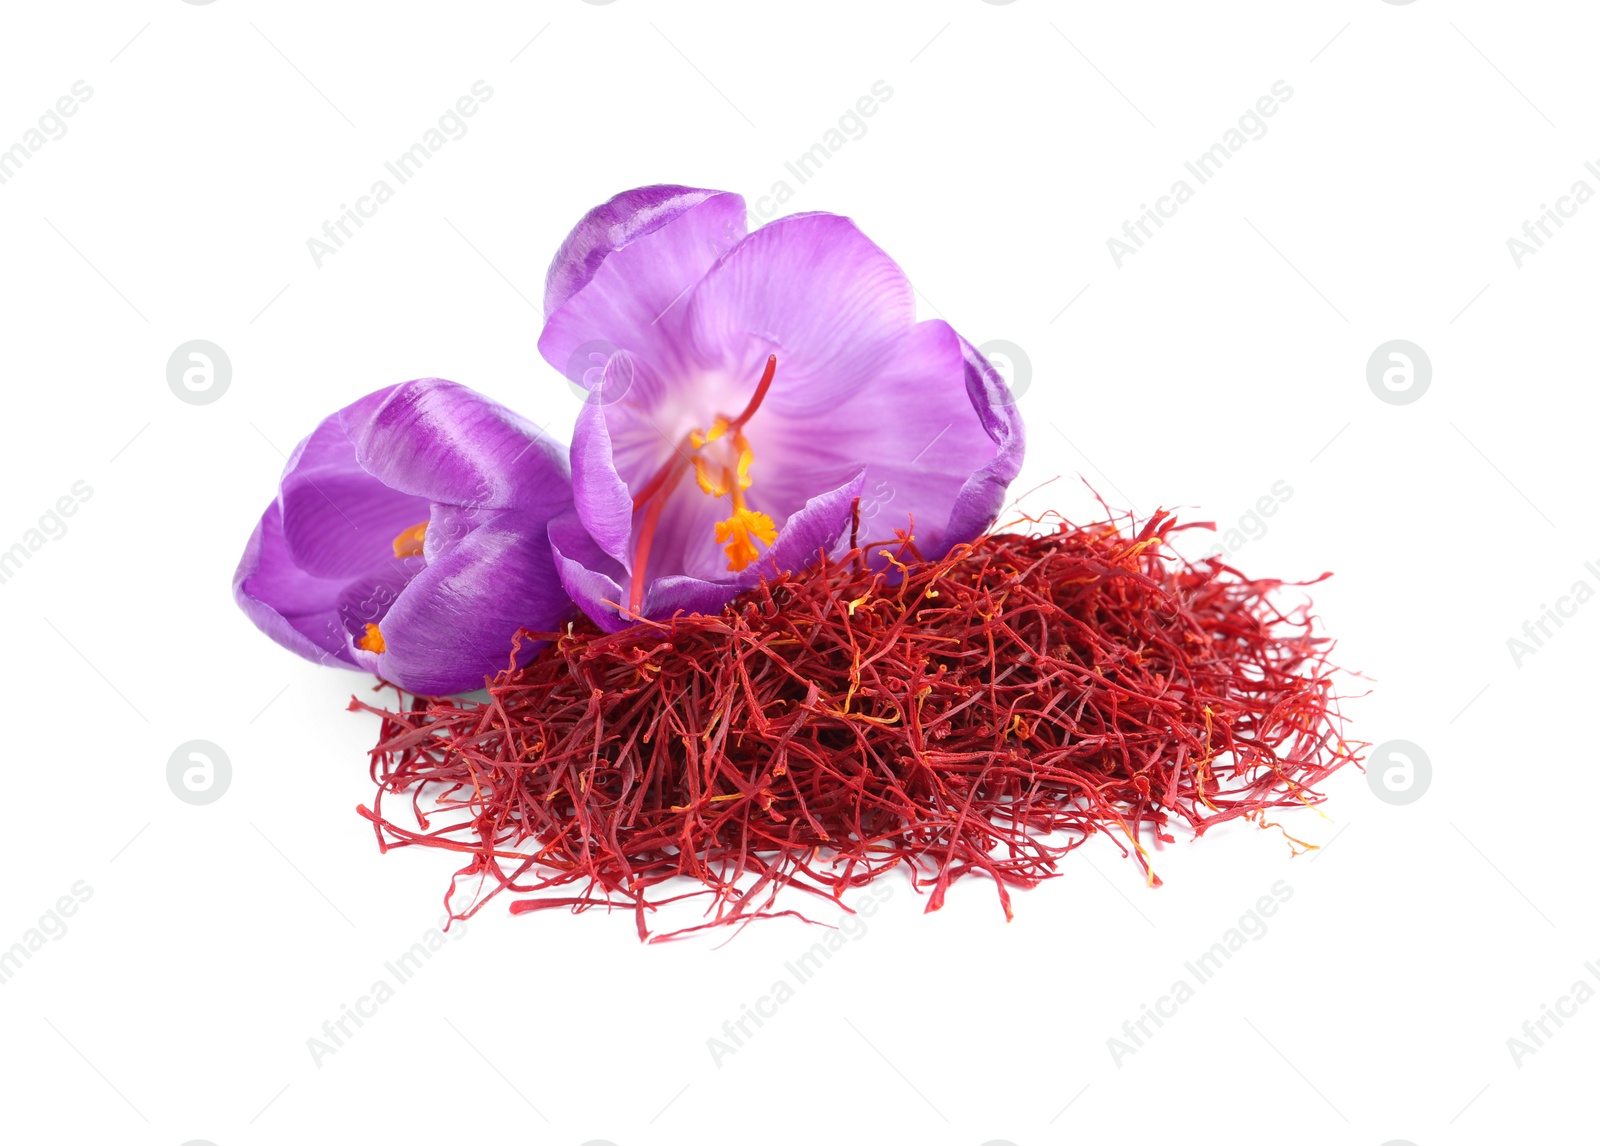 Photo of Pile of dried saffron and crocus flowers on white background